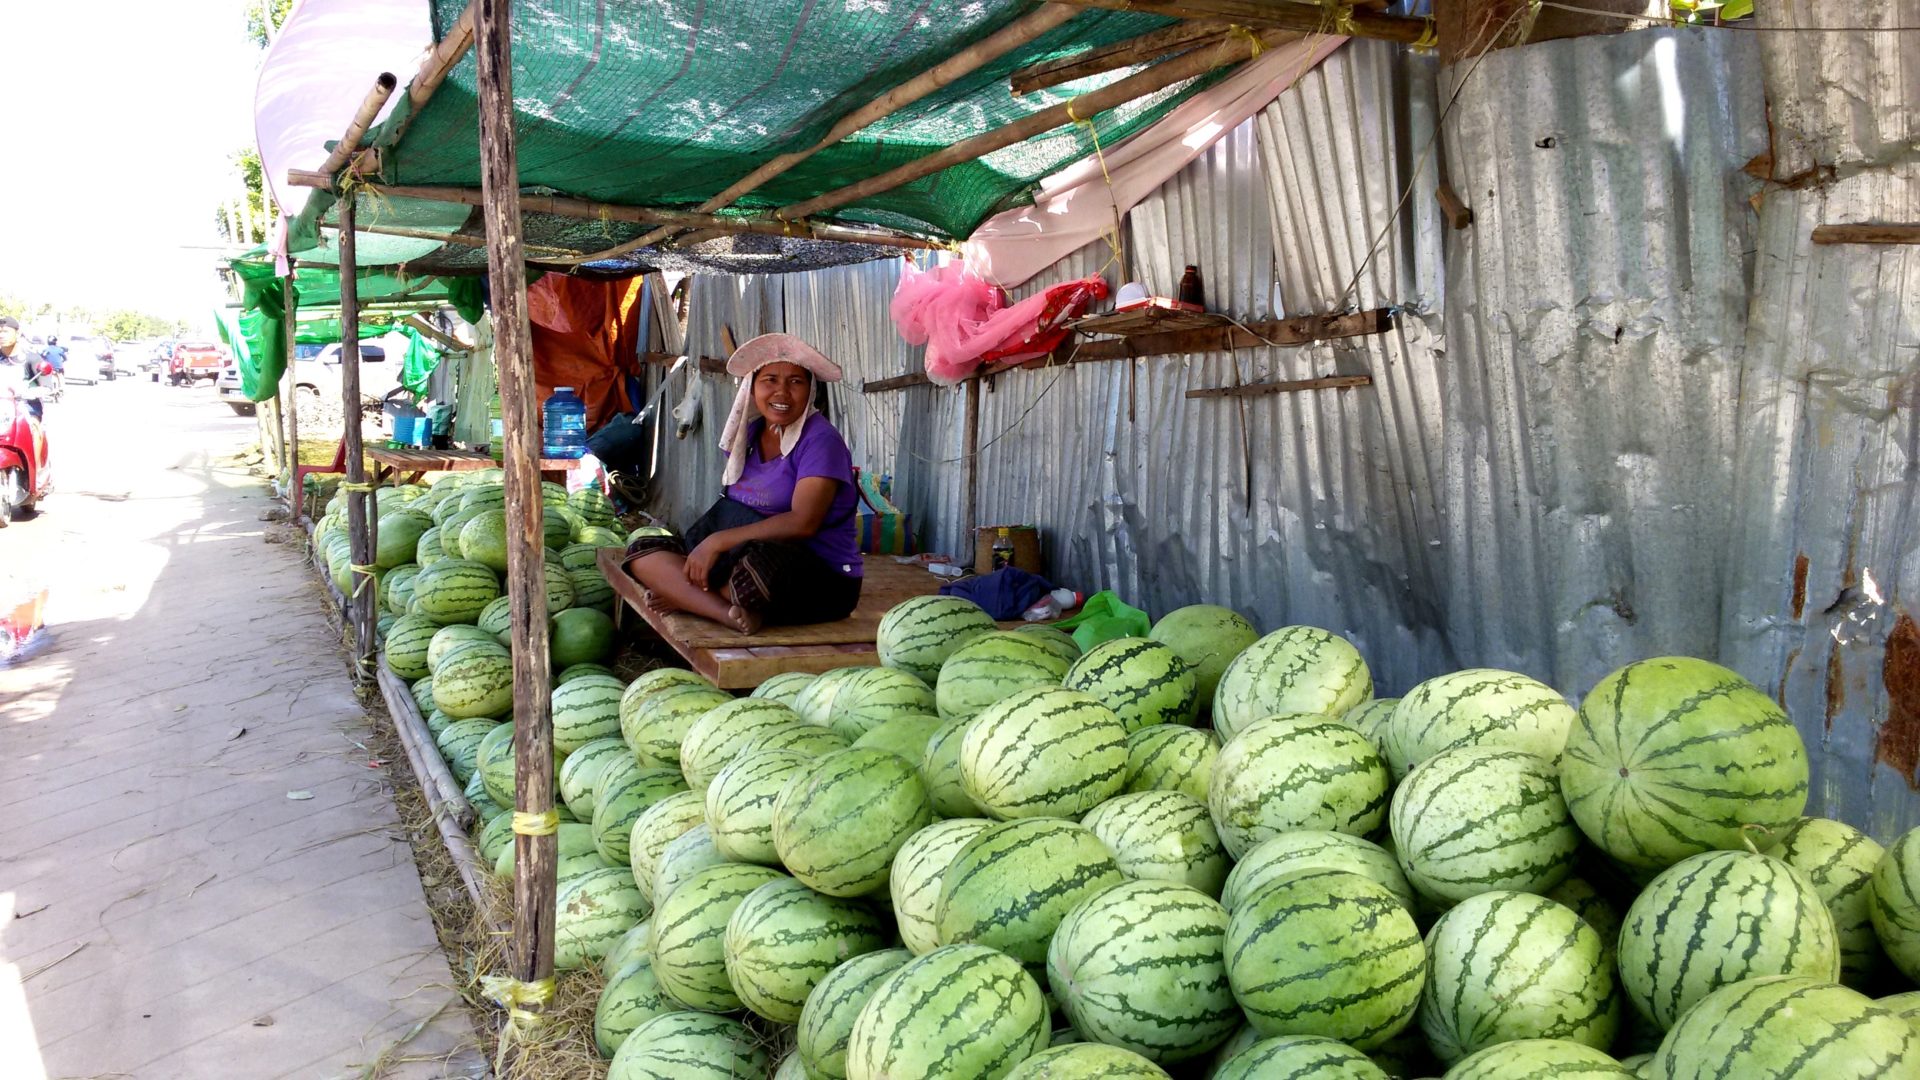 Young women sits under her stand where she sells a large number of watermelons.